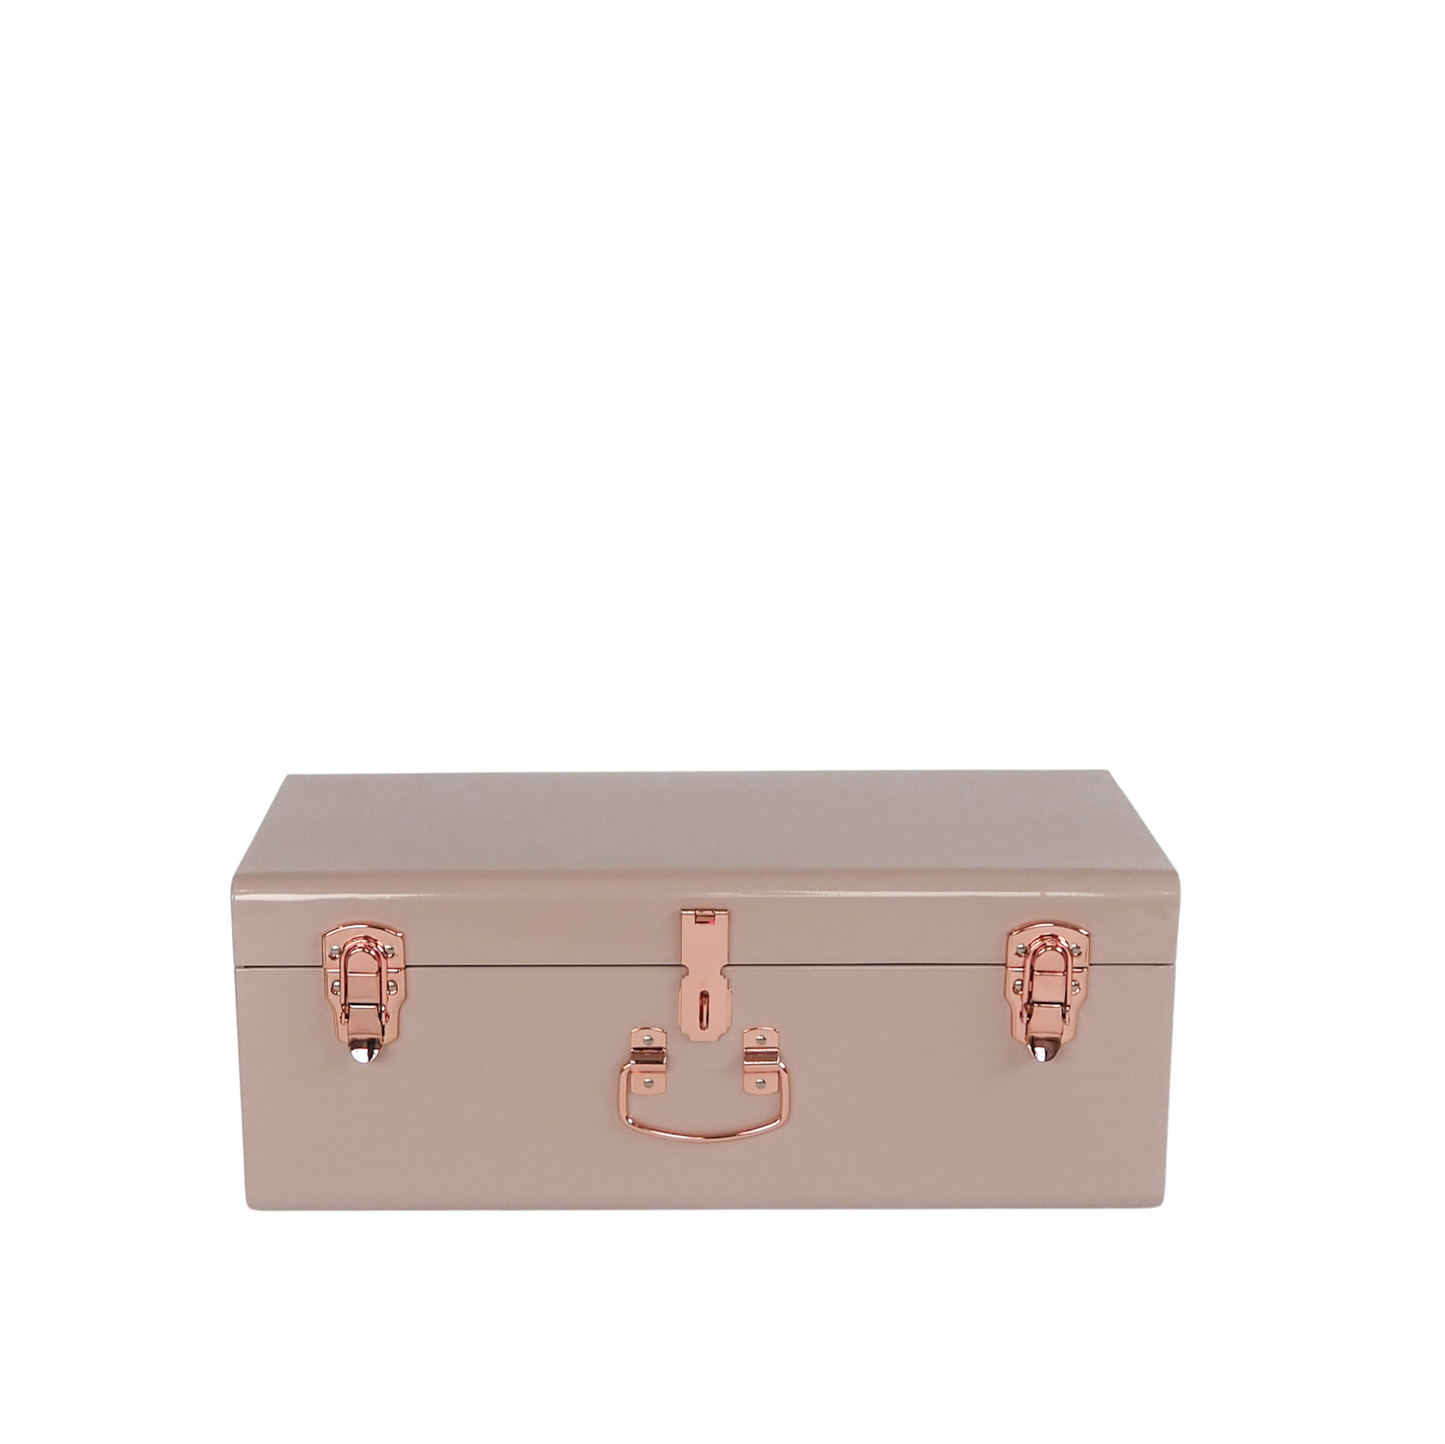 The Blush Pink – Small Trunk